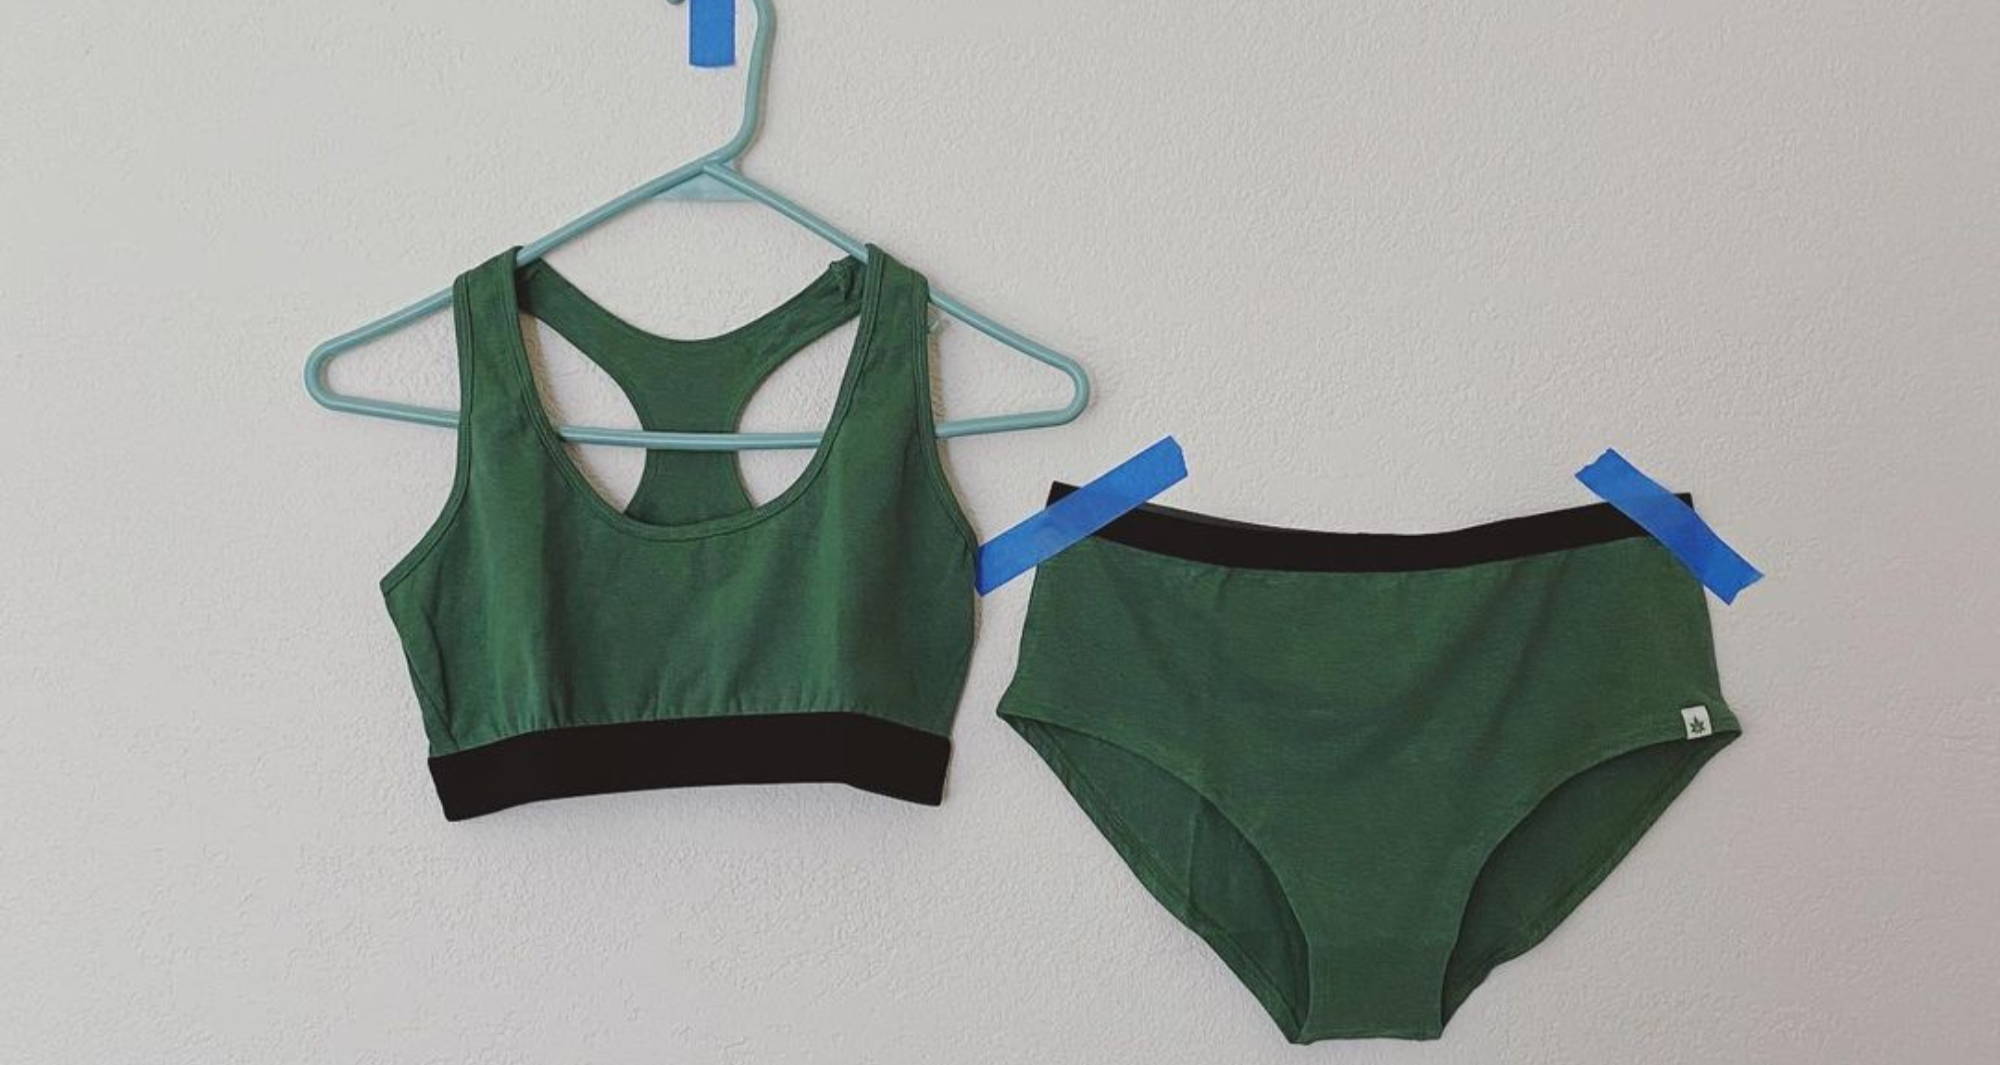 green bralette and underwear taped up with blue tape.